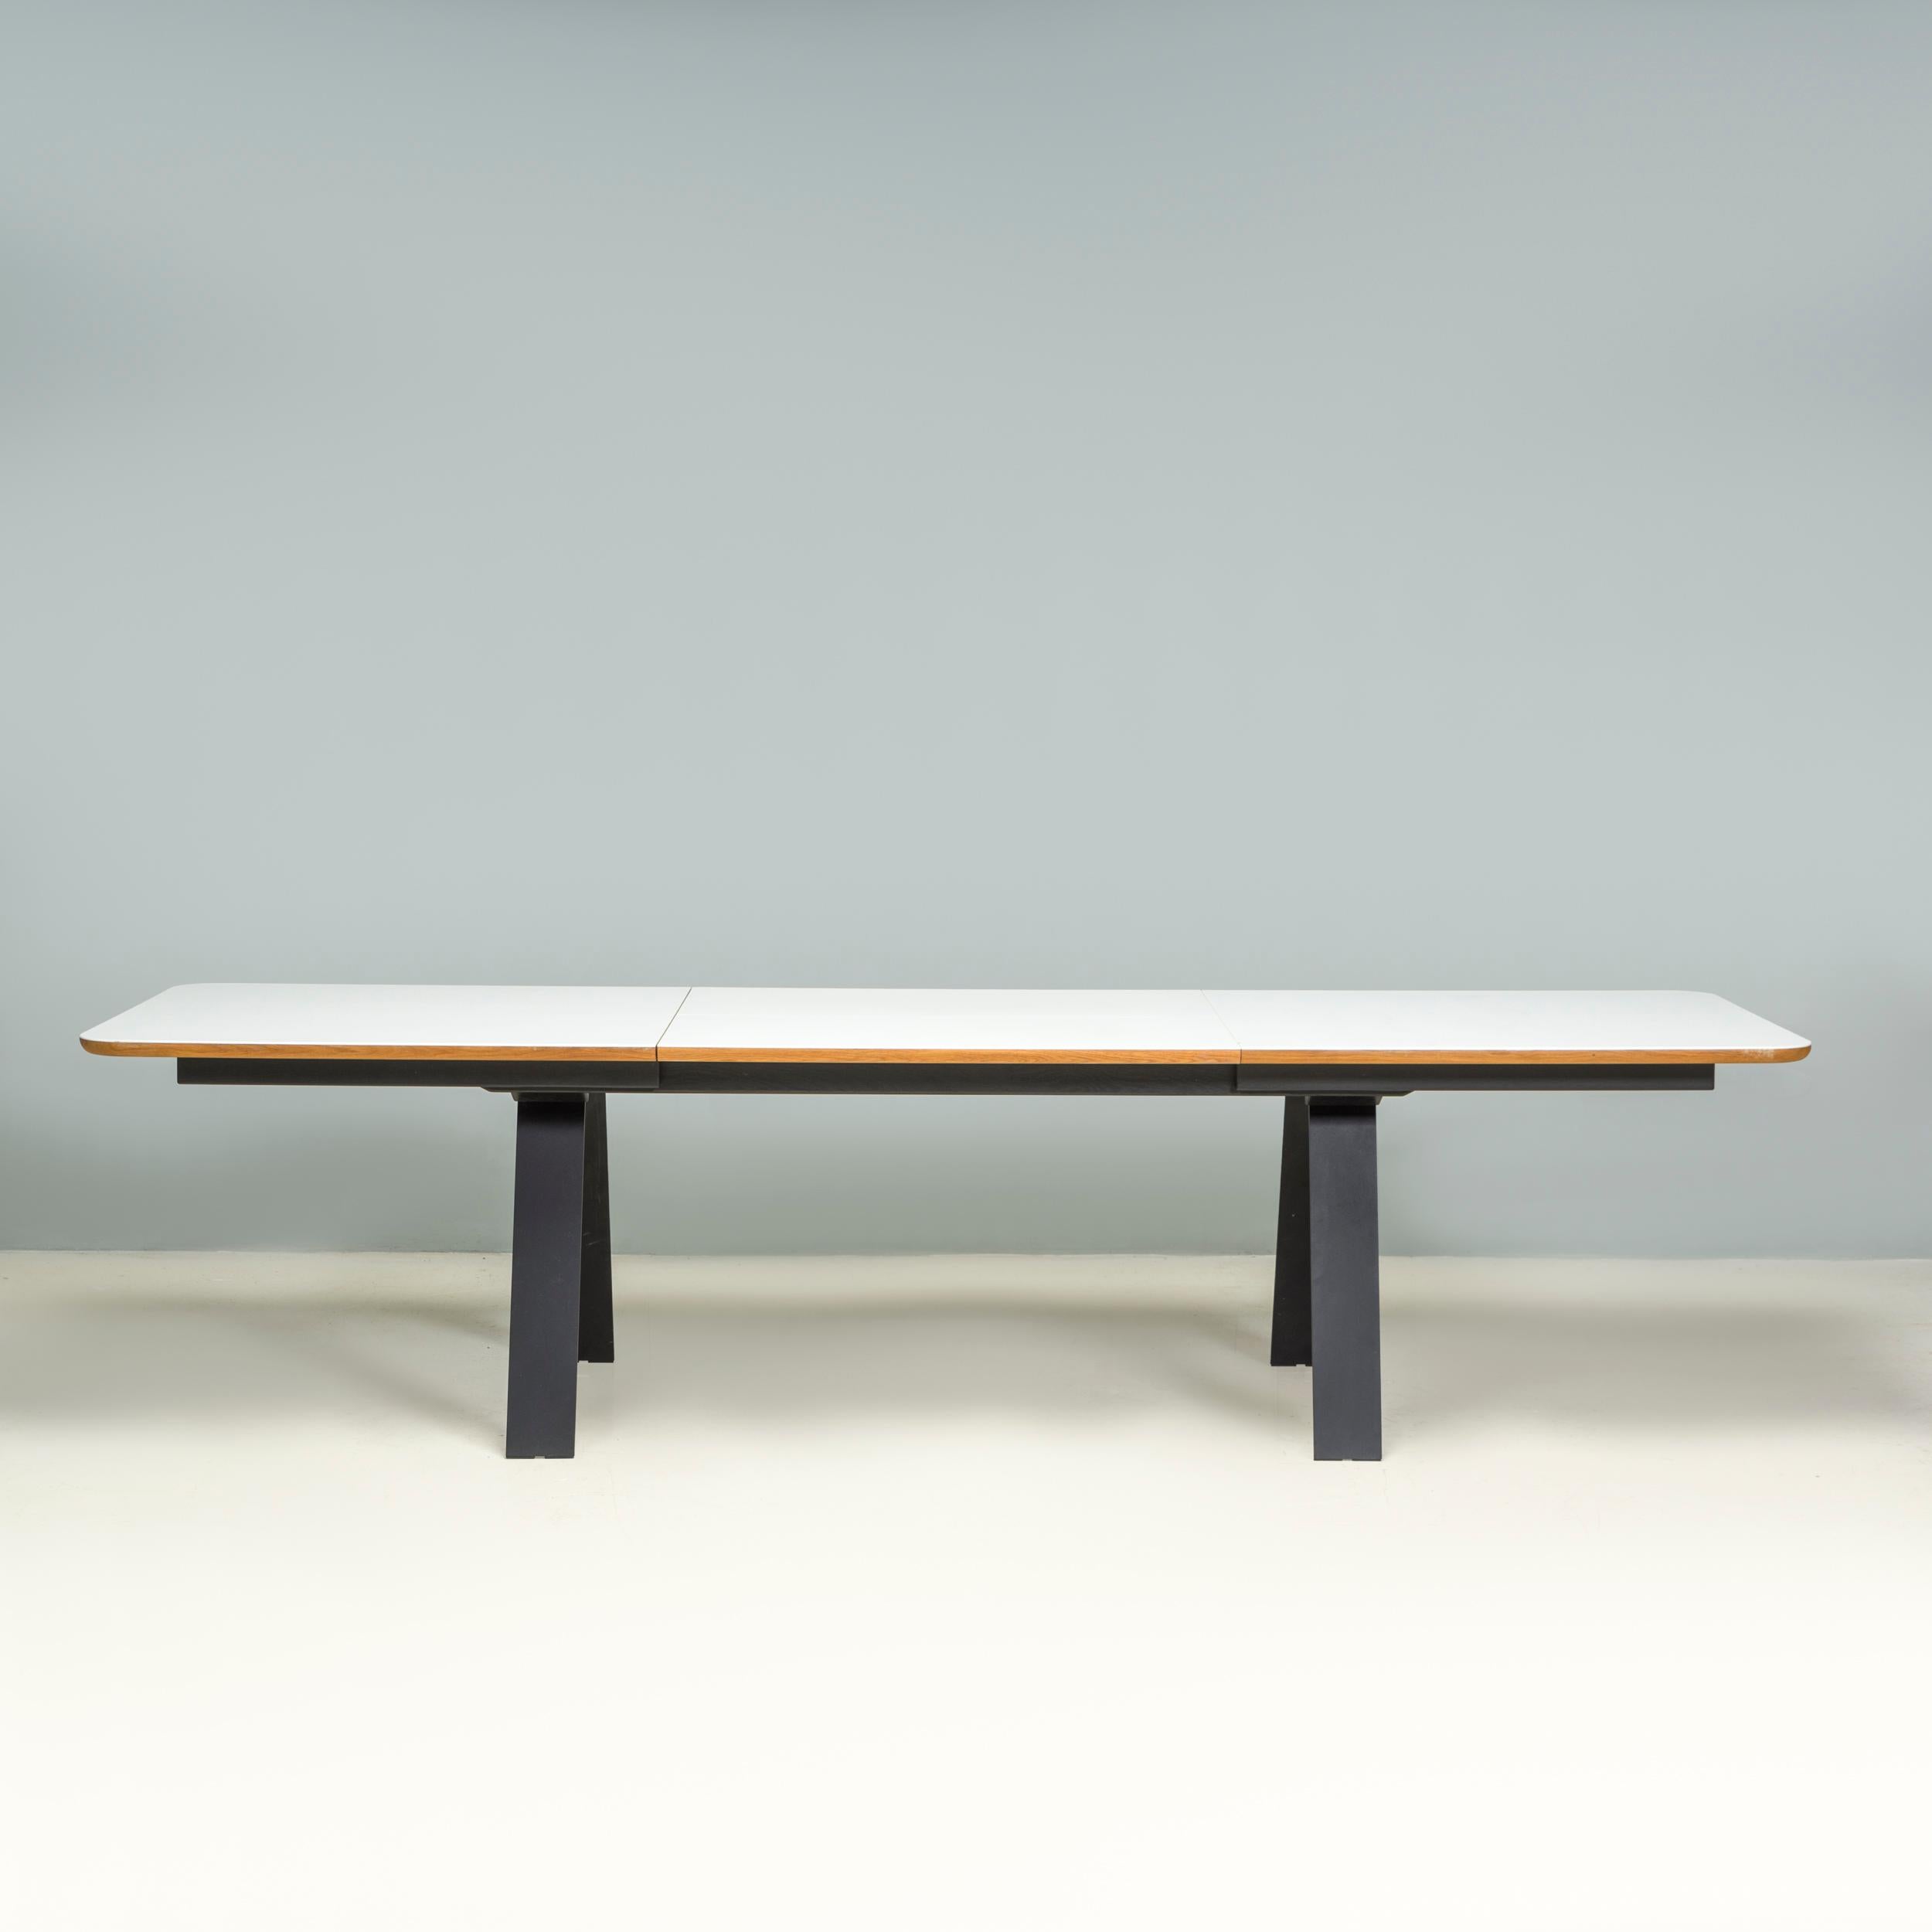 Designed by Ebbe Gehl and Søren Nissen for Naver, this Chess dining table was manufactured in Denmark in 2018.

The dining table has a large rectangular top with rounded corners in white Corian with a contrasting walnut finish around the edge.

With